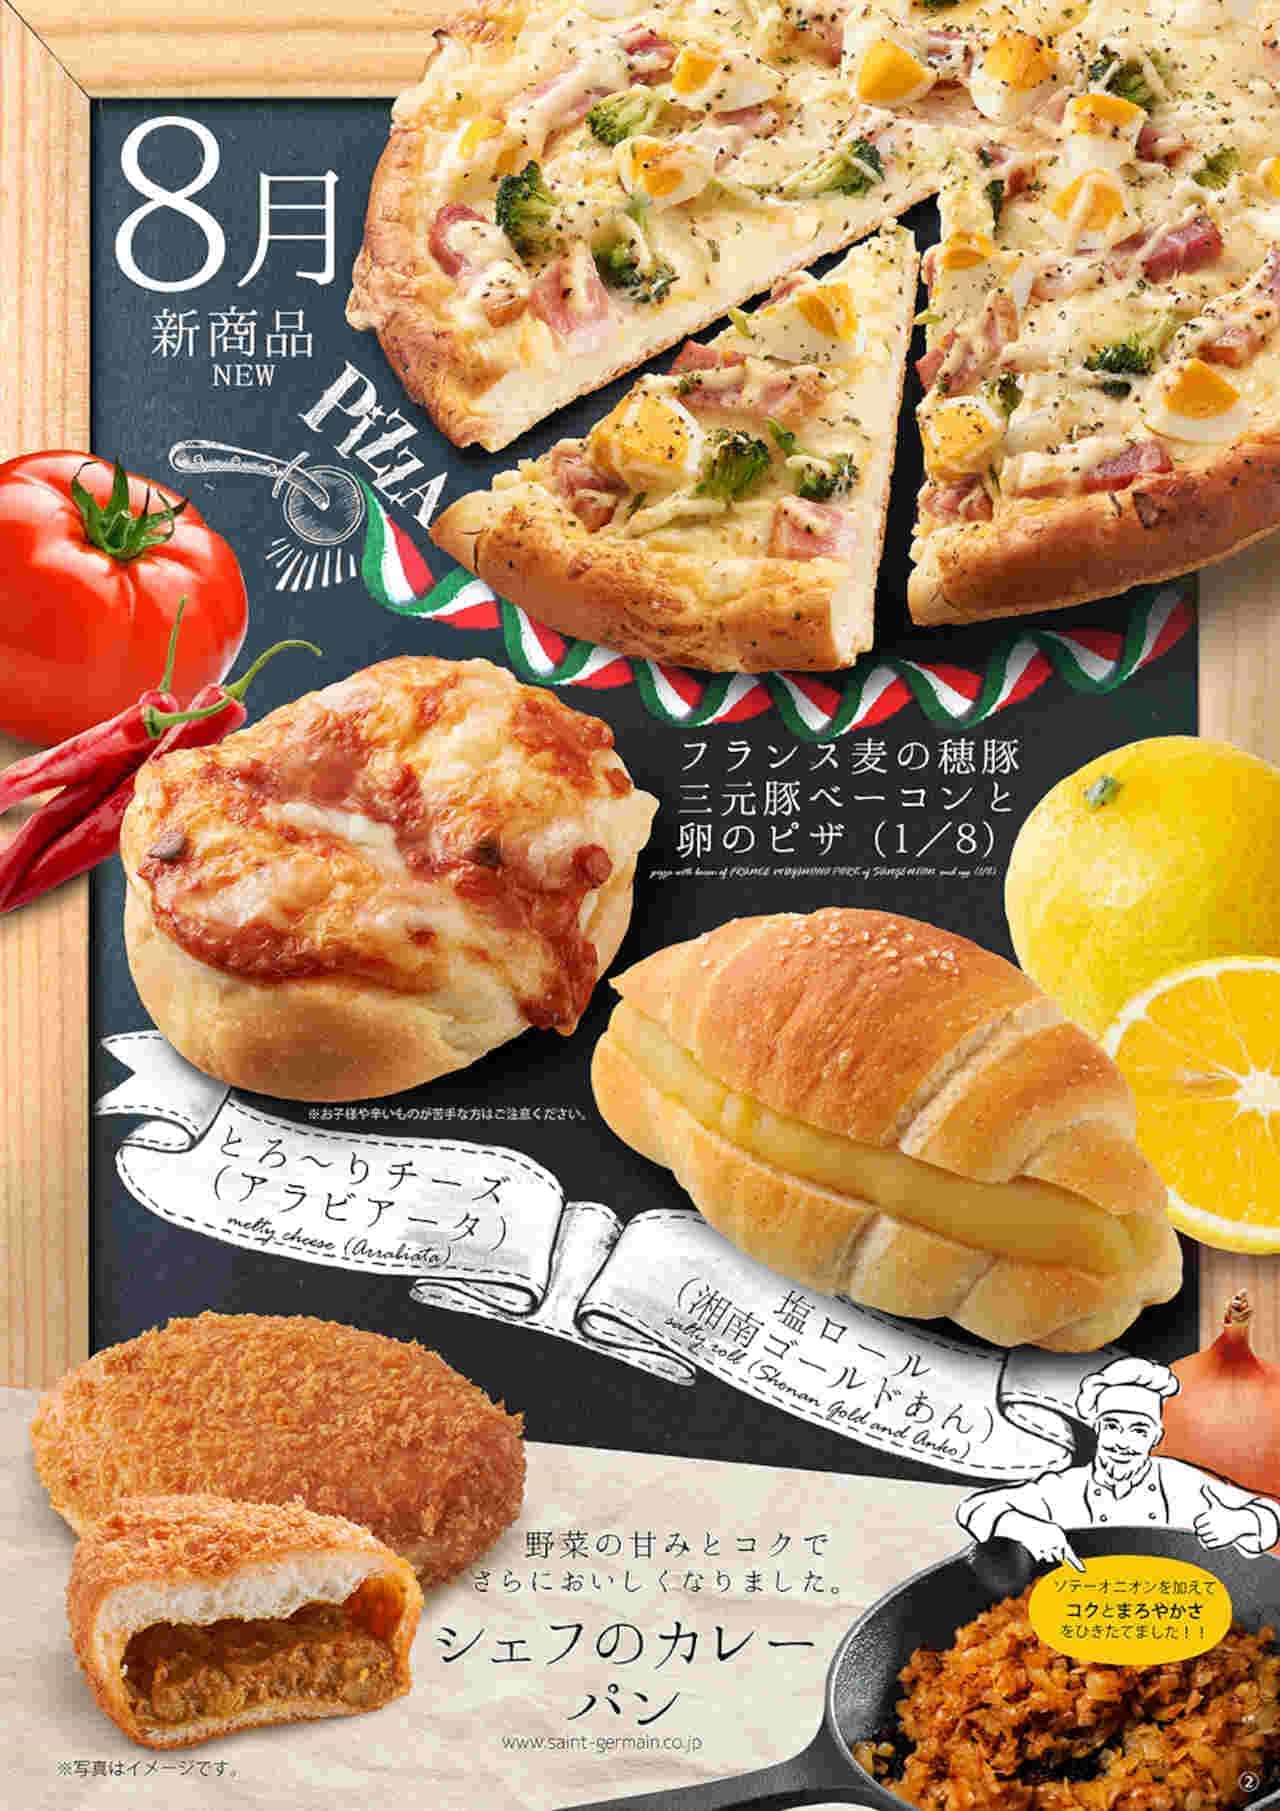 St. Germain "Pizza with French Barley Ears Sangen Pork Bacon and Eggs (1/8)", "Salt Roll (Shonan Gold An)" and other new breads for August.